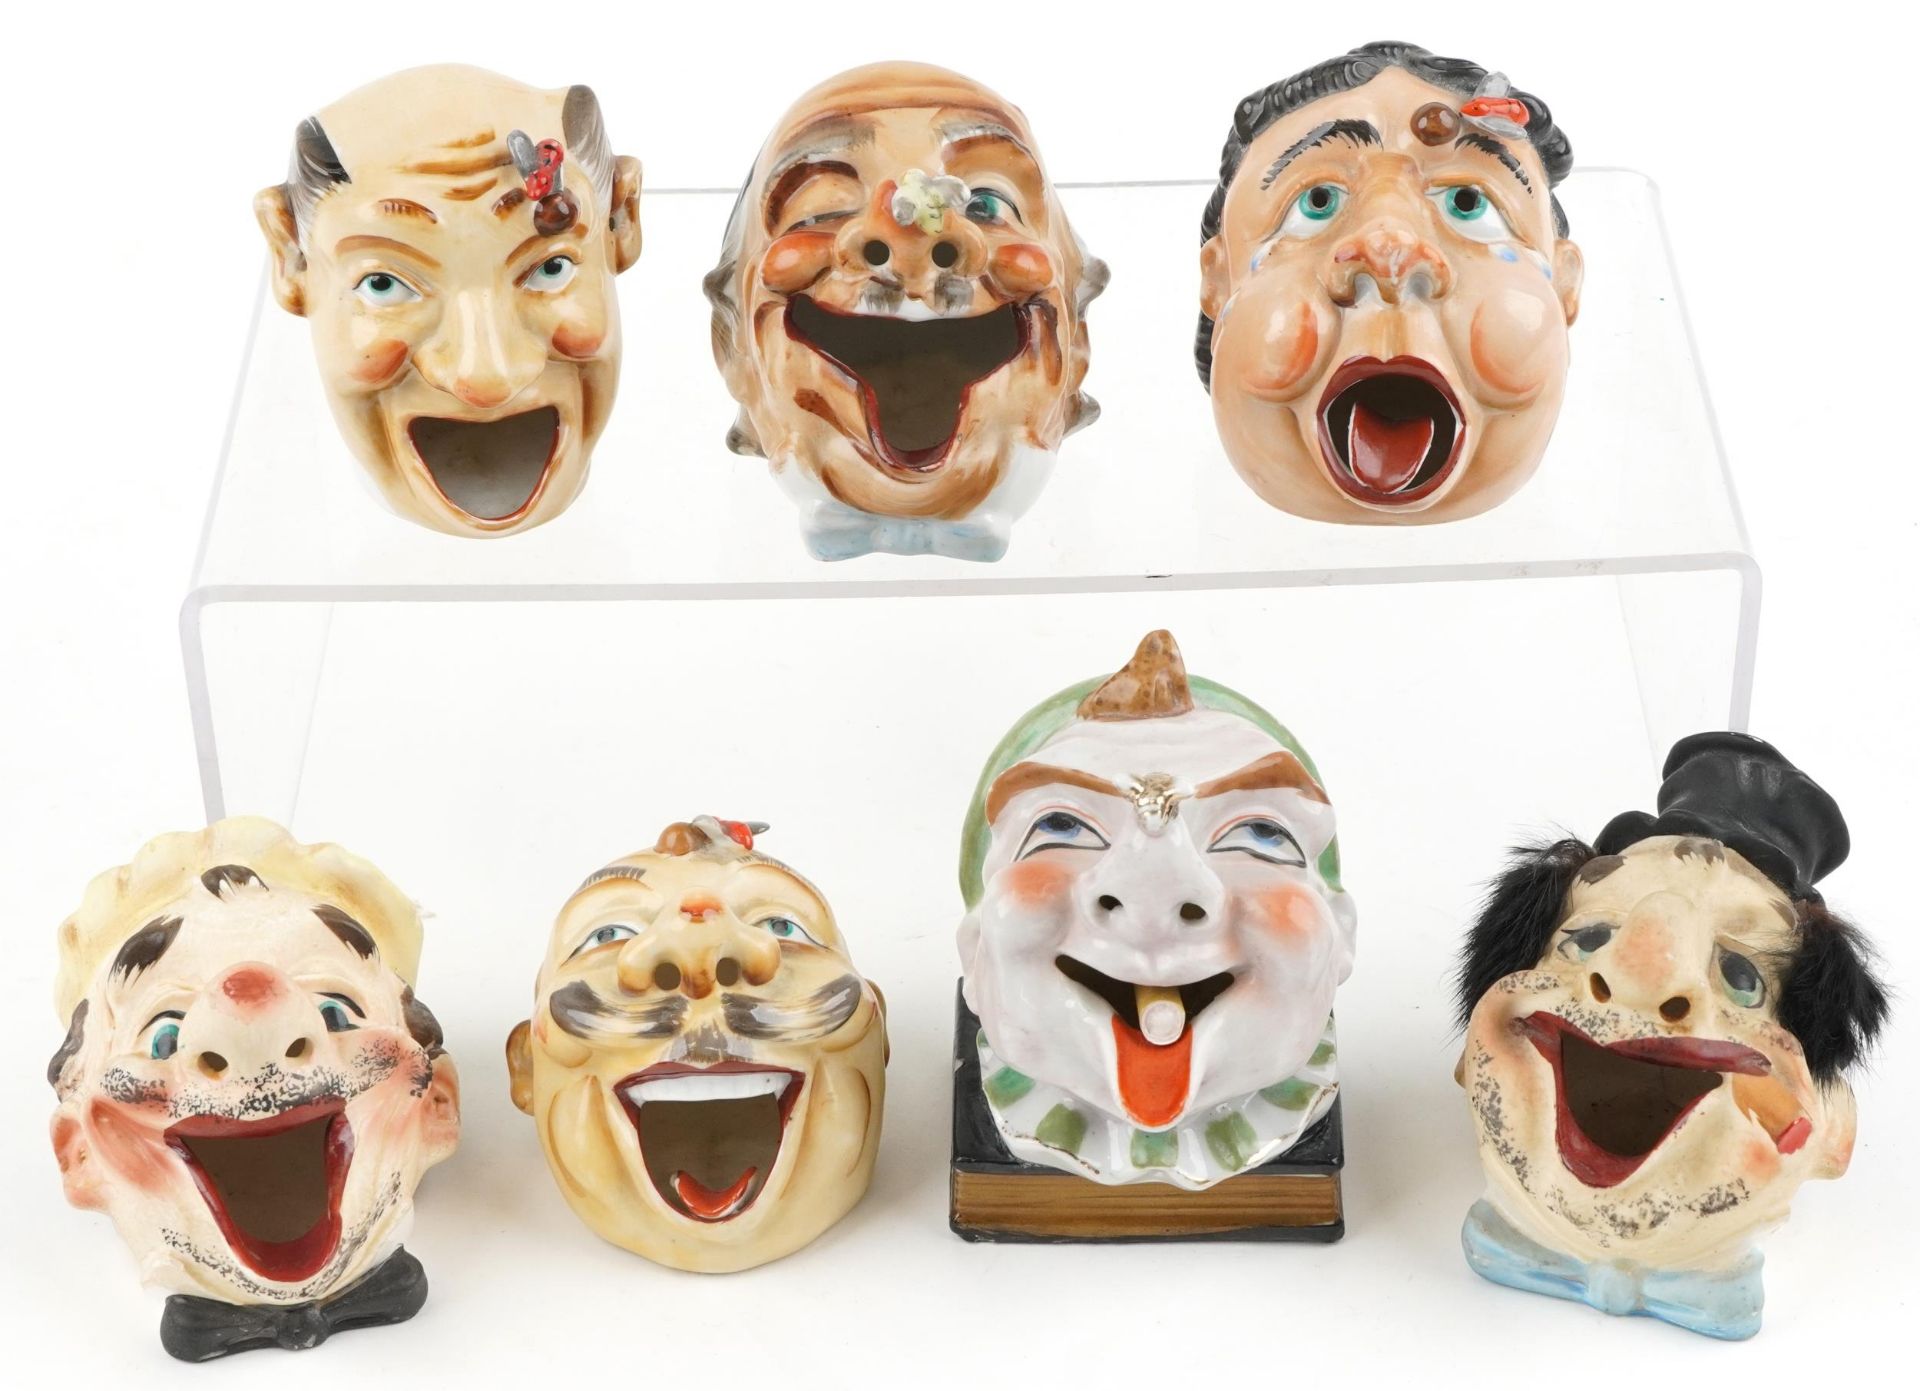 Seven early 20th century smoking interest Japanese porcelain ashtrays in the form of comical